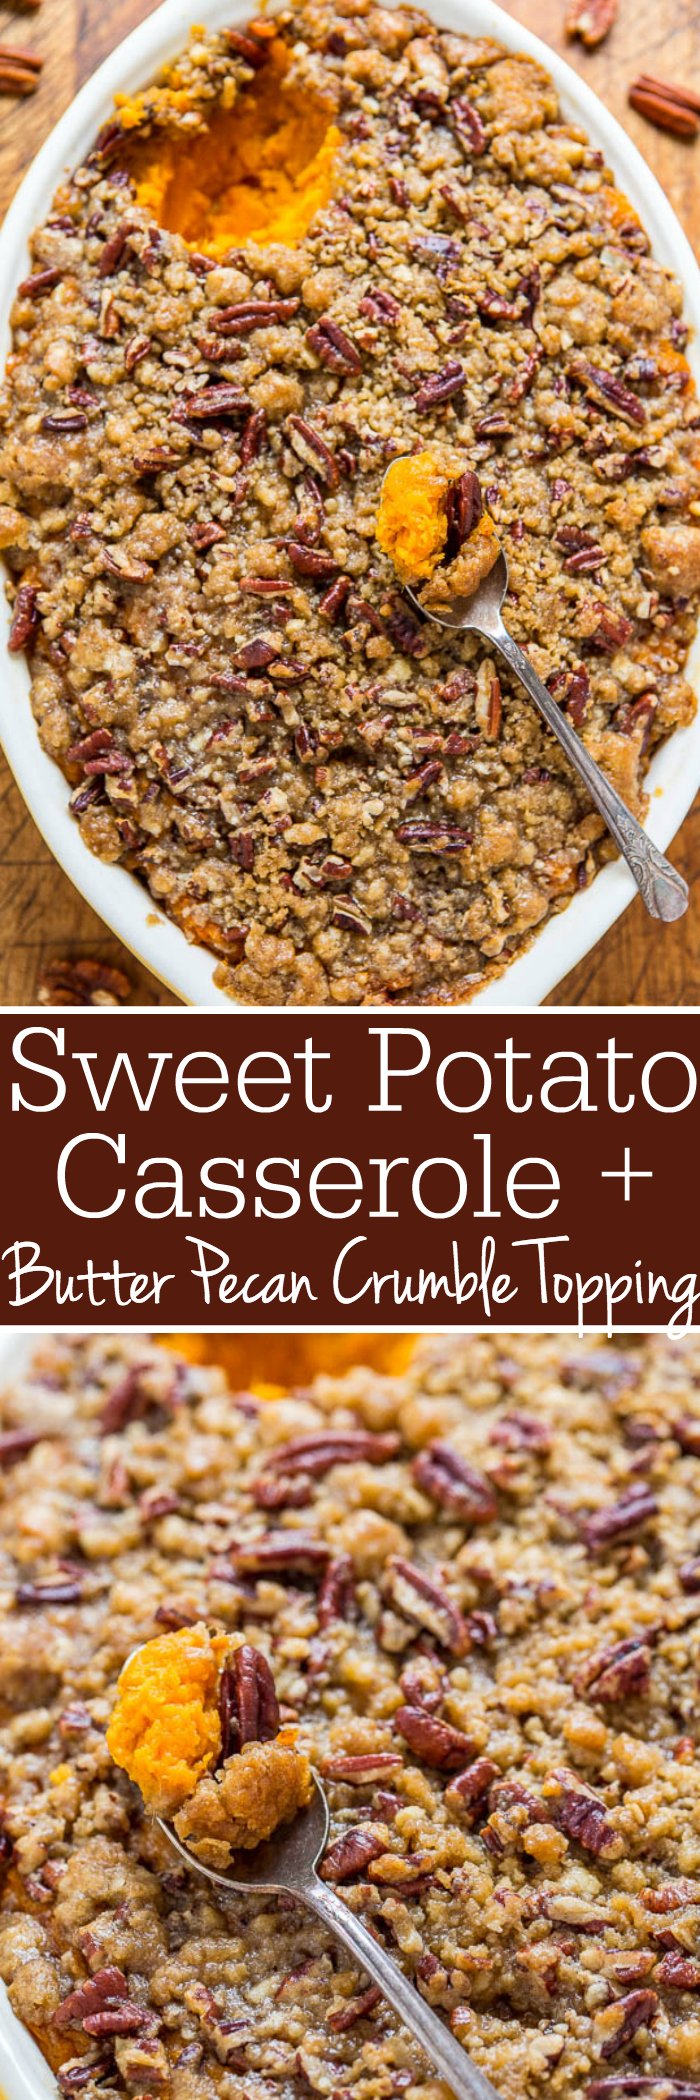 Sweet Potato Casserole with Butter Pecan Crumble Topping - The holiday classic just got even BETTER because of the amazing TOPPING!! A buttery, brown sugary, crunch that's irresistible! Easy and you can pre-assemble to save time!!